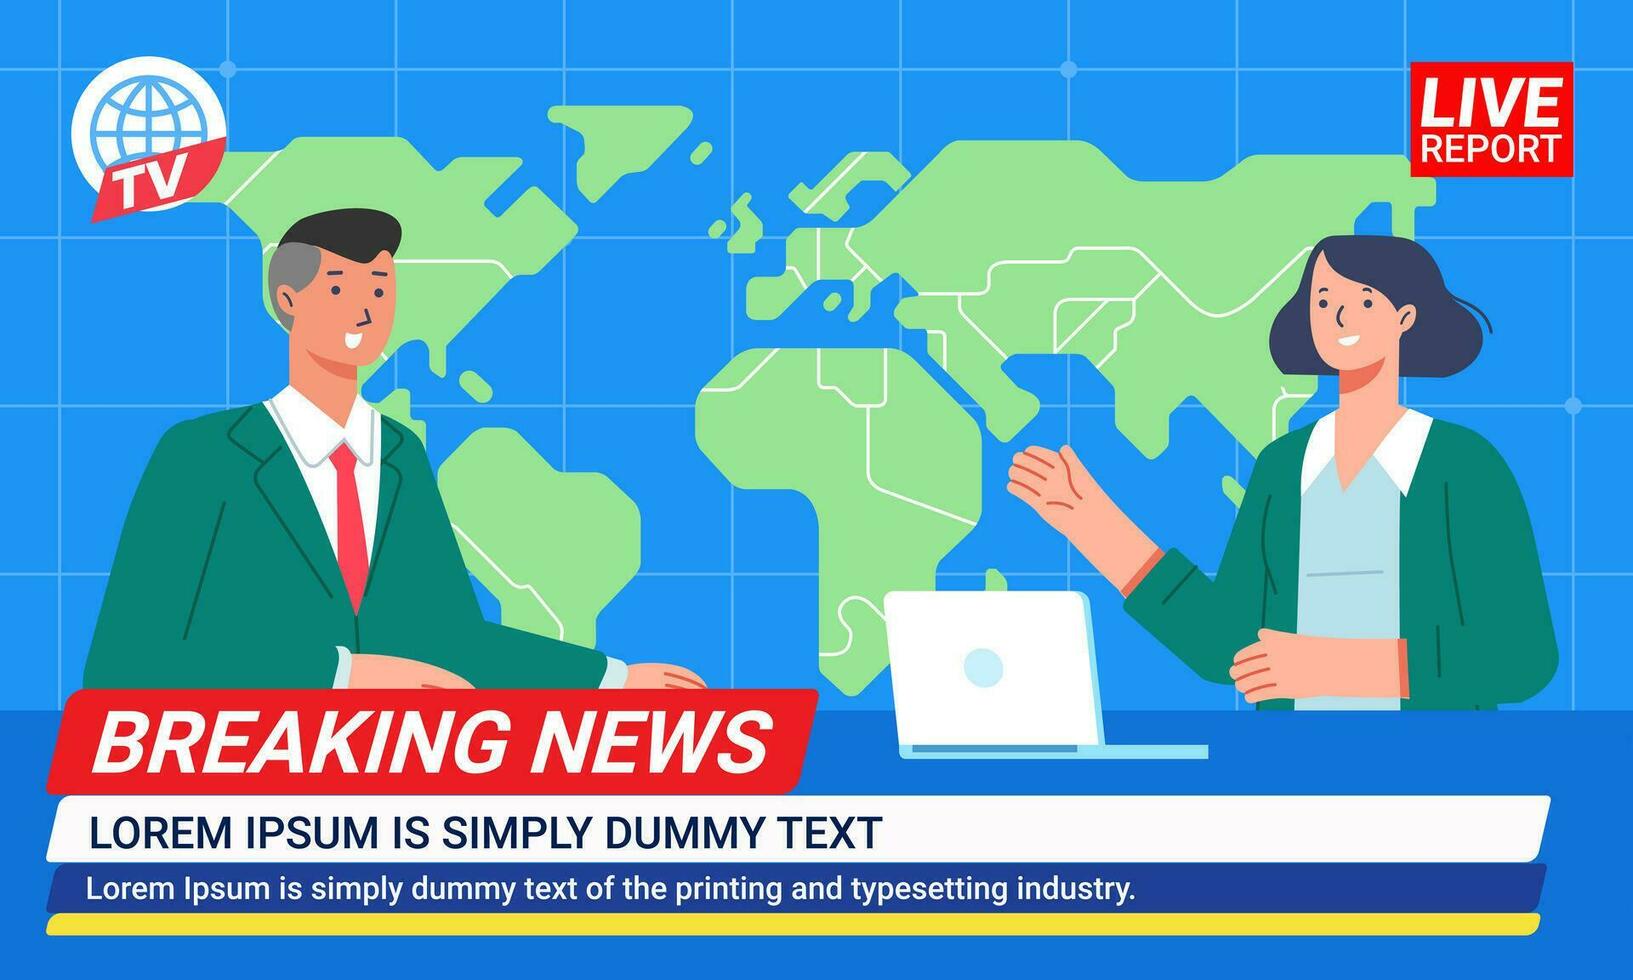 Couple news anchors reporting news in TV studio presenters on breaking news with world map background vector